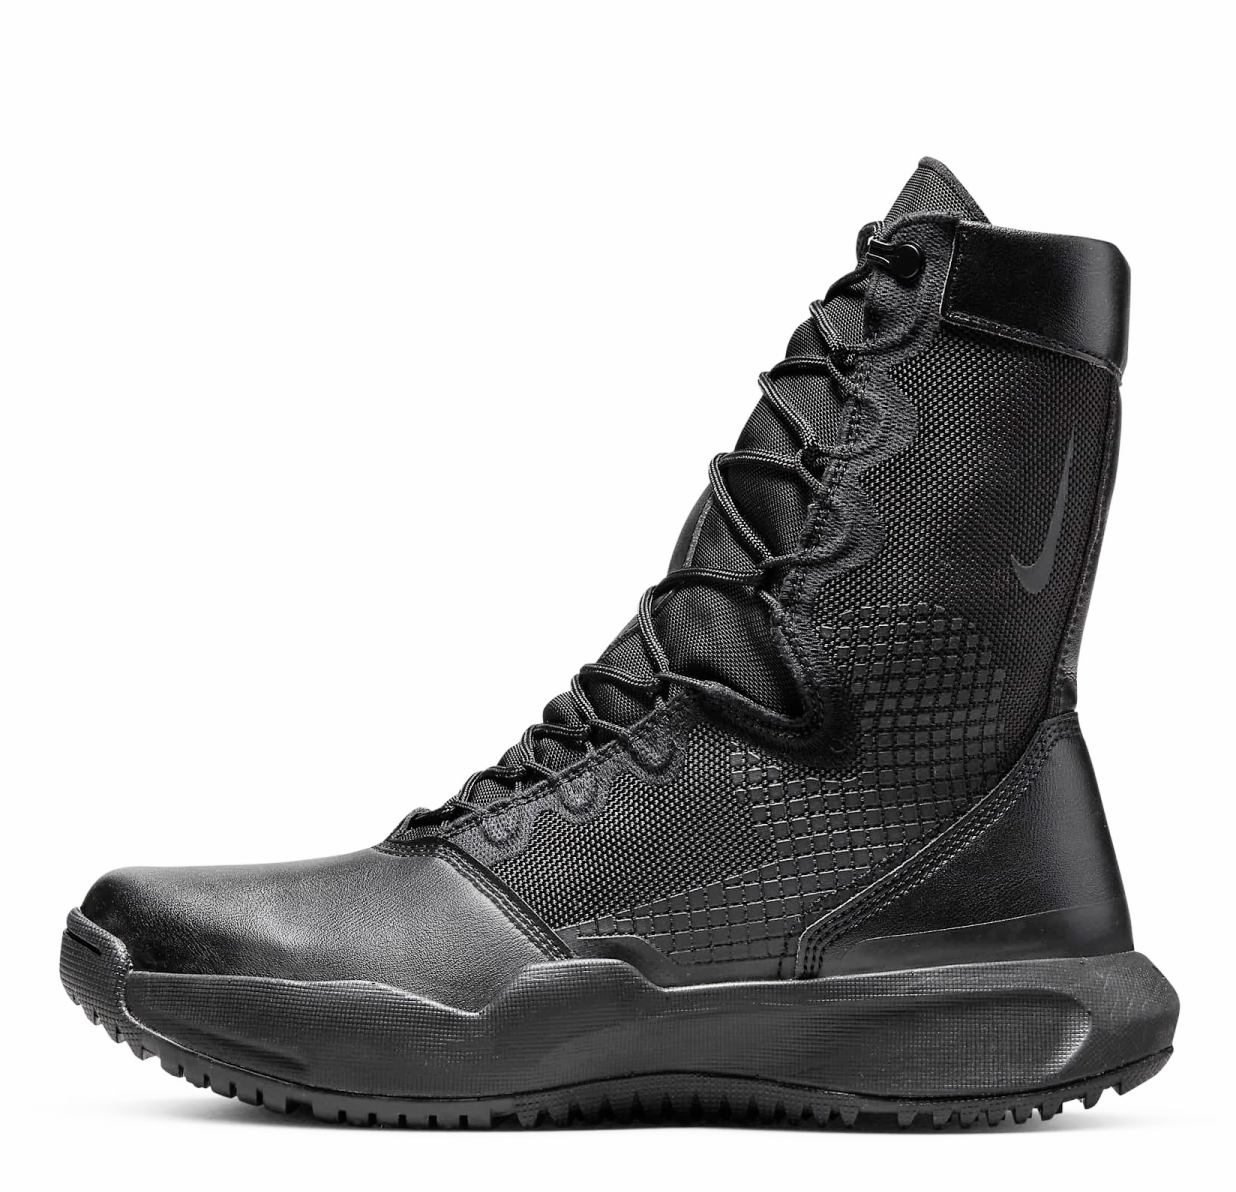 SFB B1 Black Leather Tactical Boots DX2117-001 –